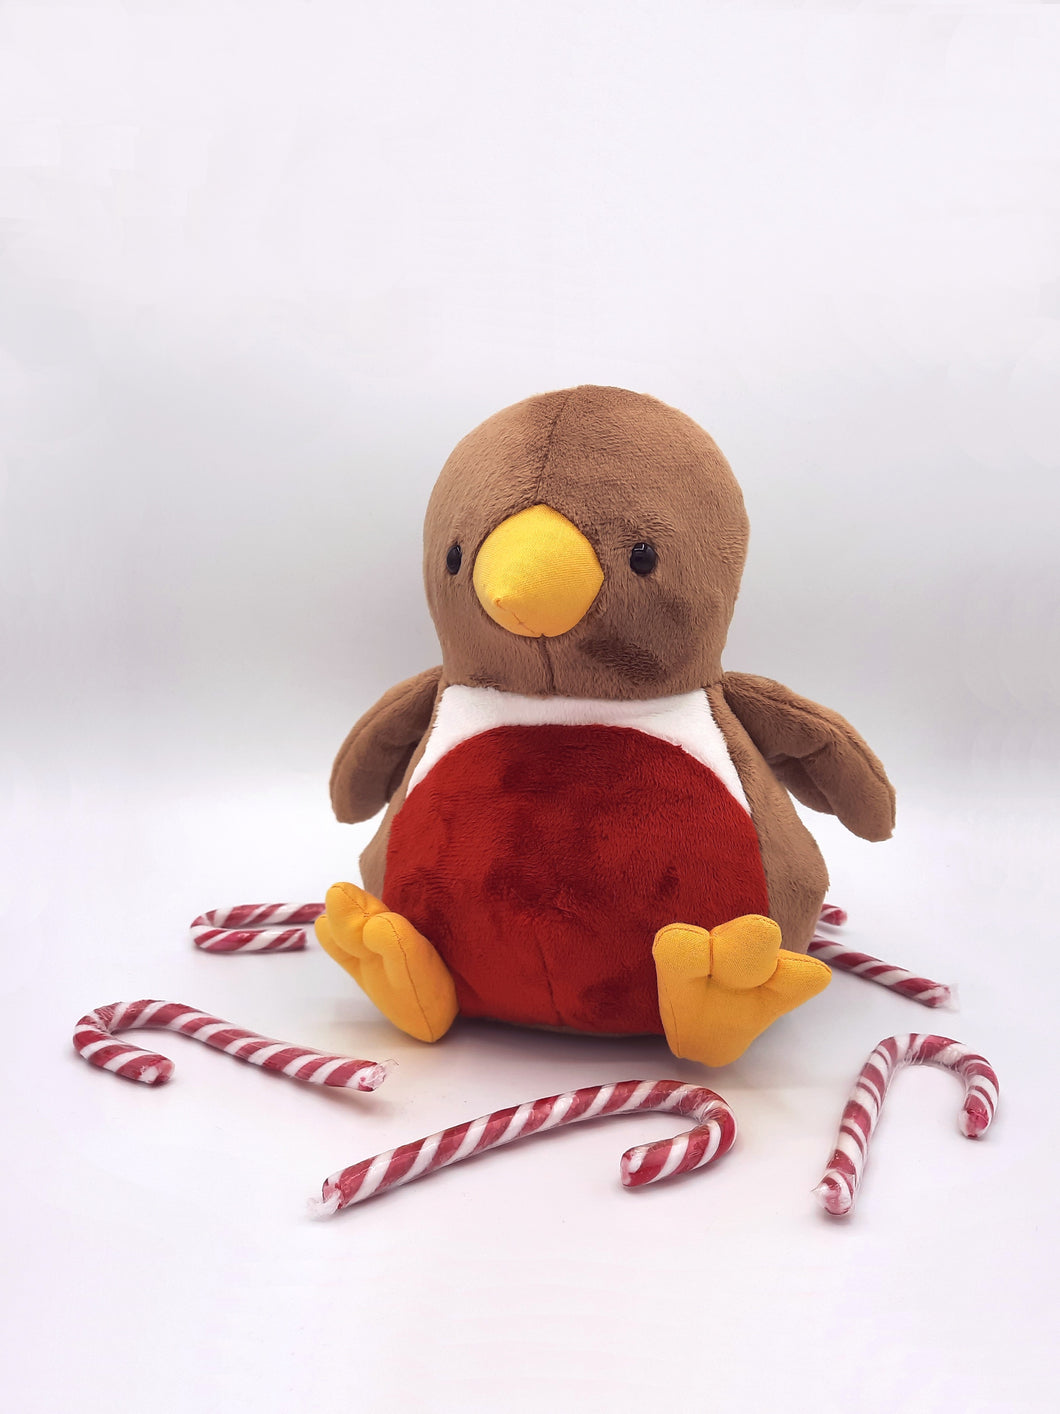 Handmade free soft toy softie festive robin pattern. A great sewing project to make with and for children at Christmas. By Jo Carter.